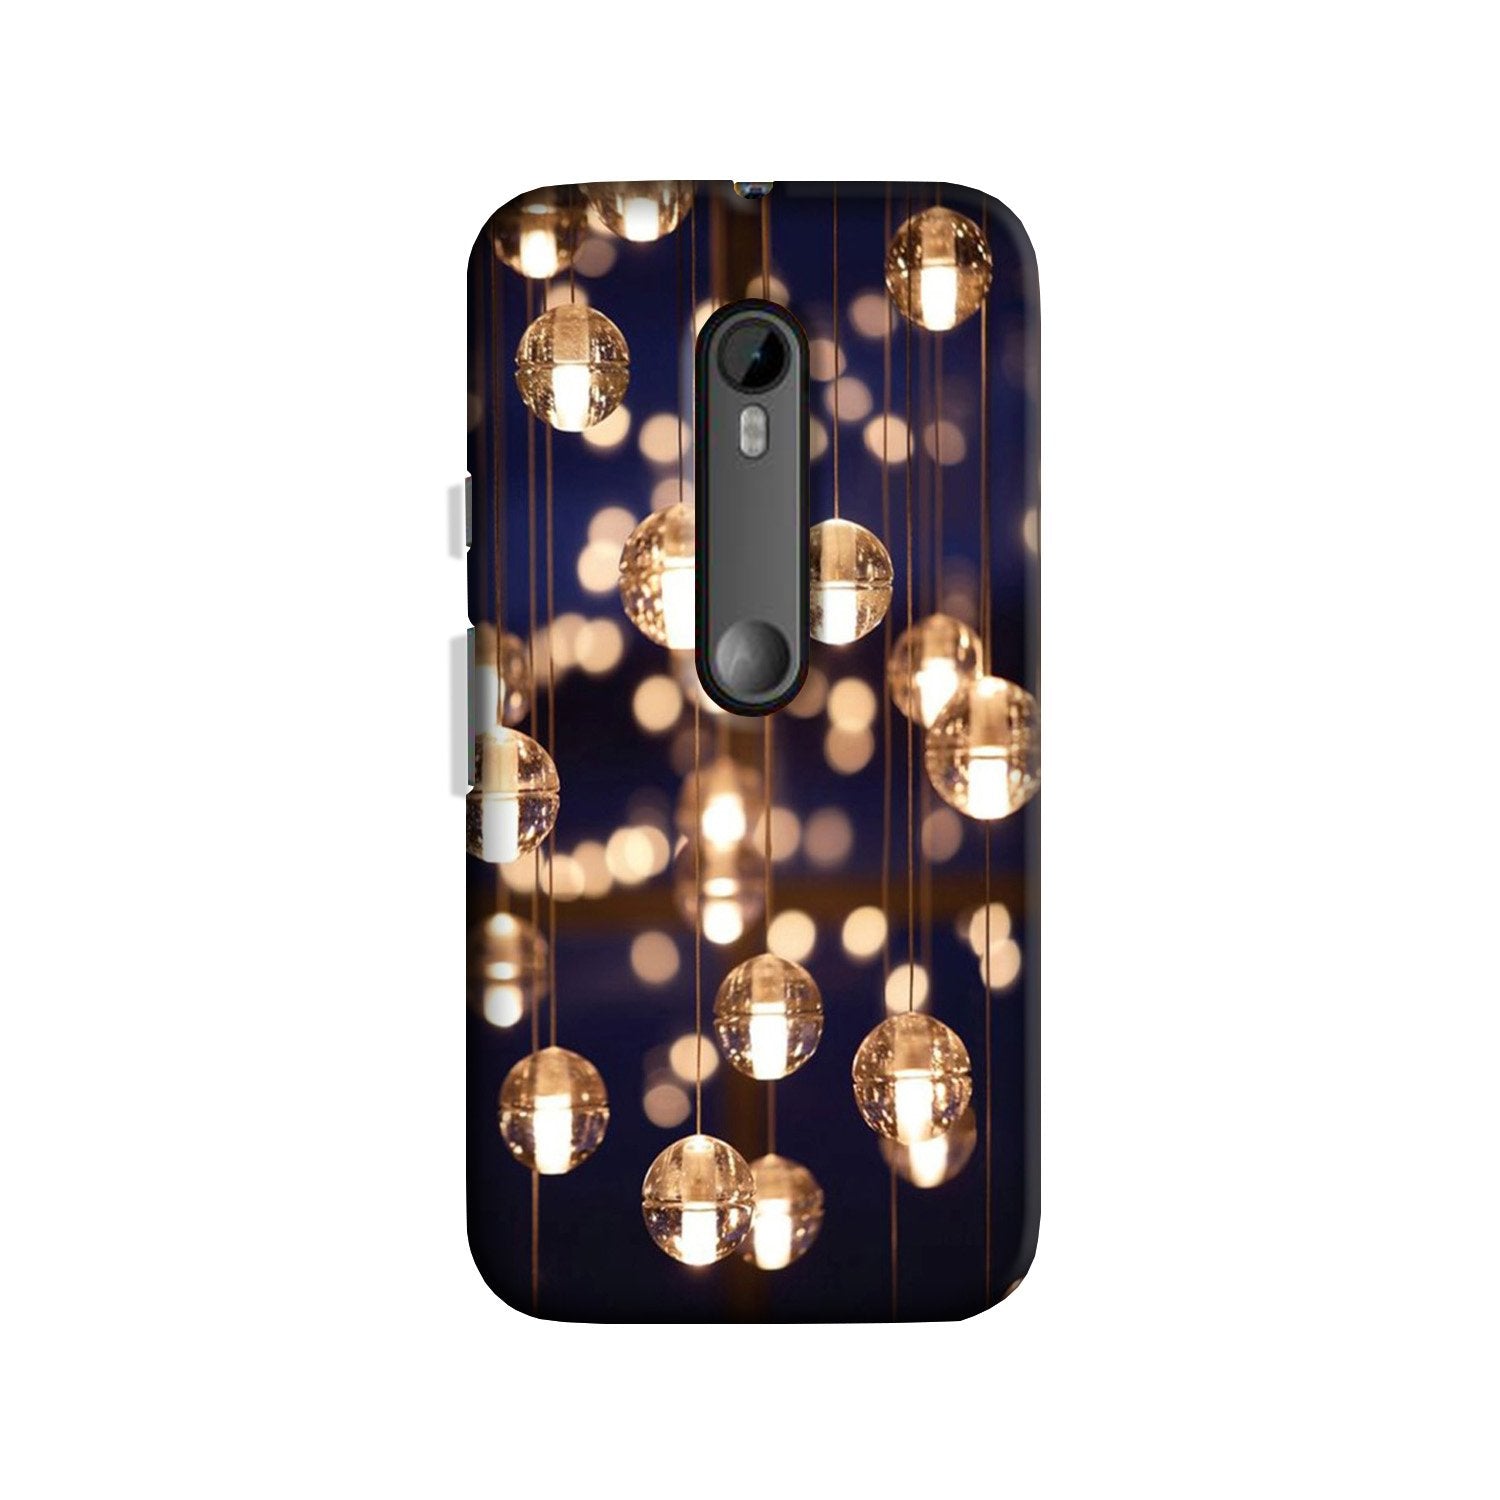 Party Bulb2 Case for Moto X Play